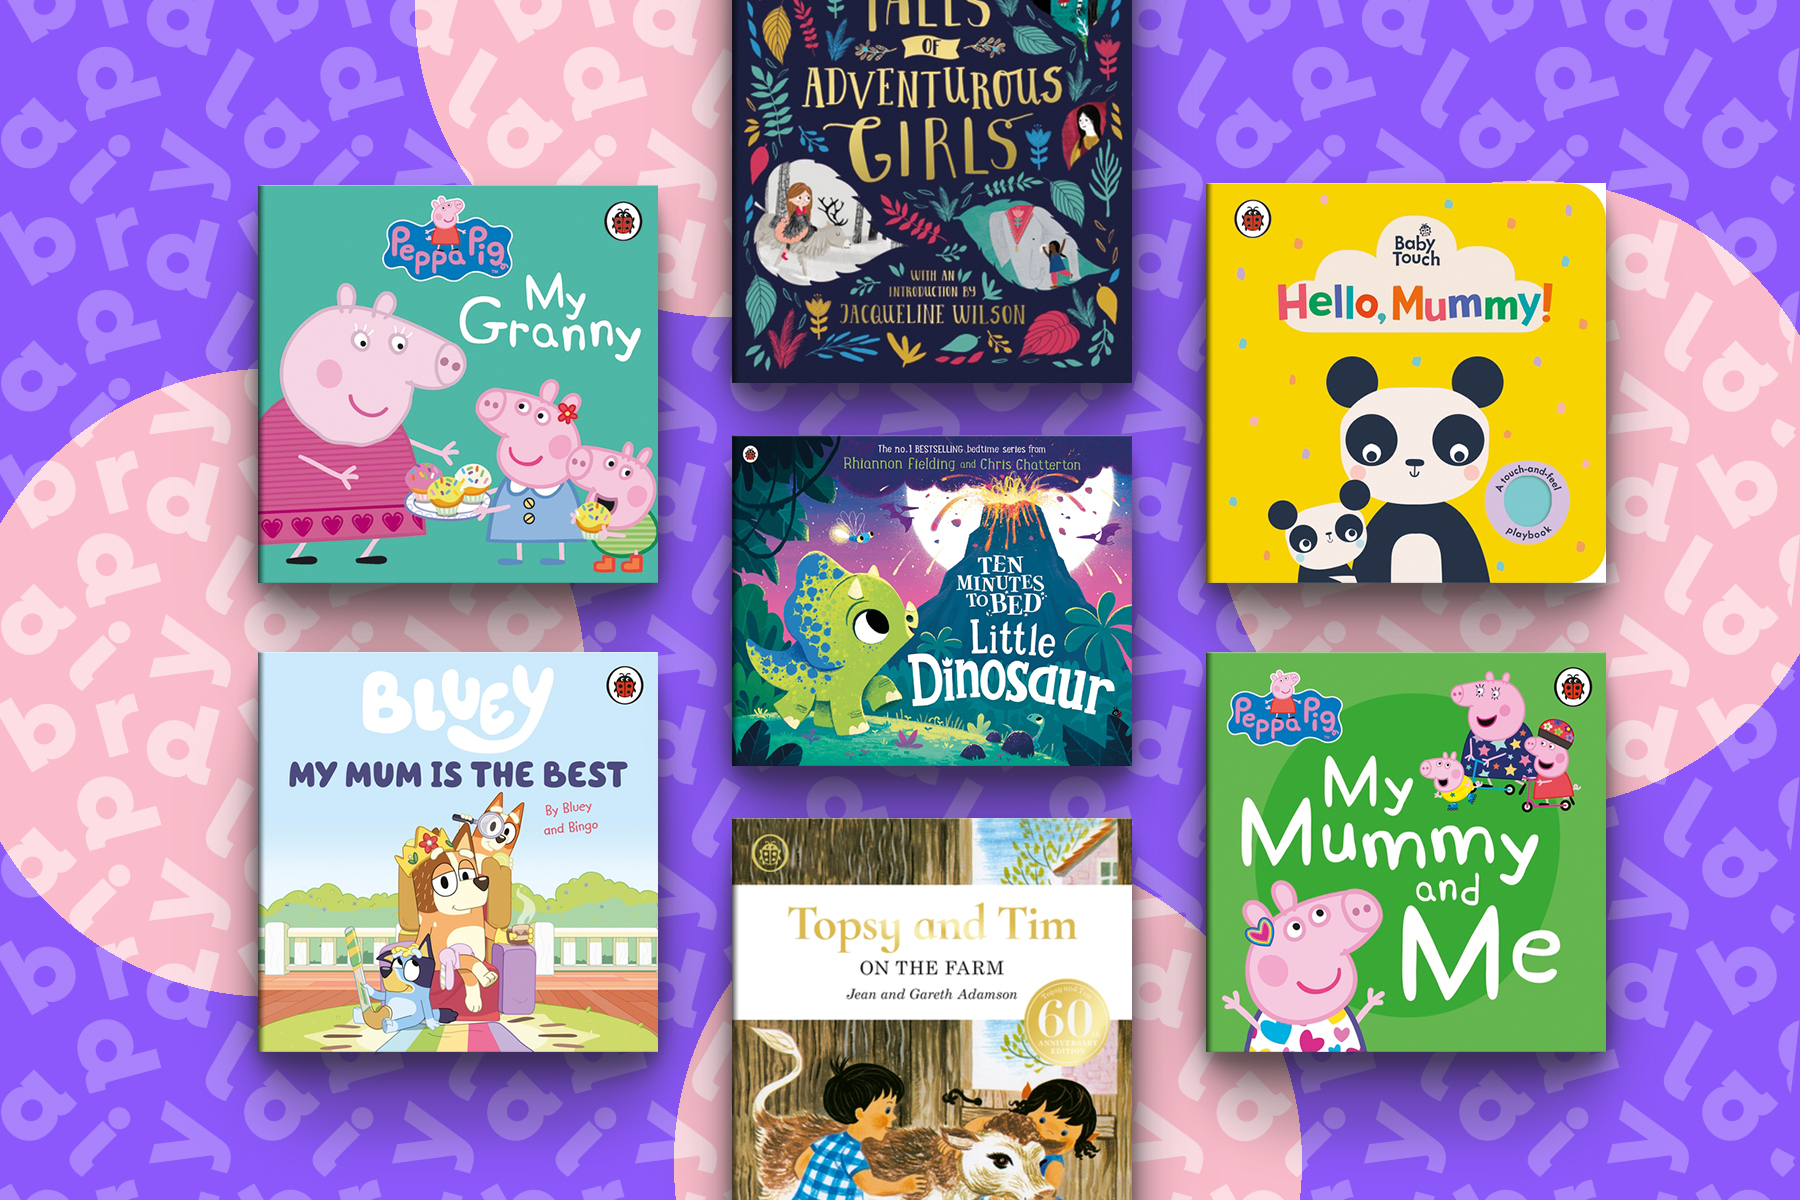 An image showing a selection of children's Ladybird books to share on Mother's Day. They are on a purple background with a Ladybird text pattern and pink spots.